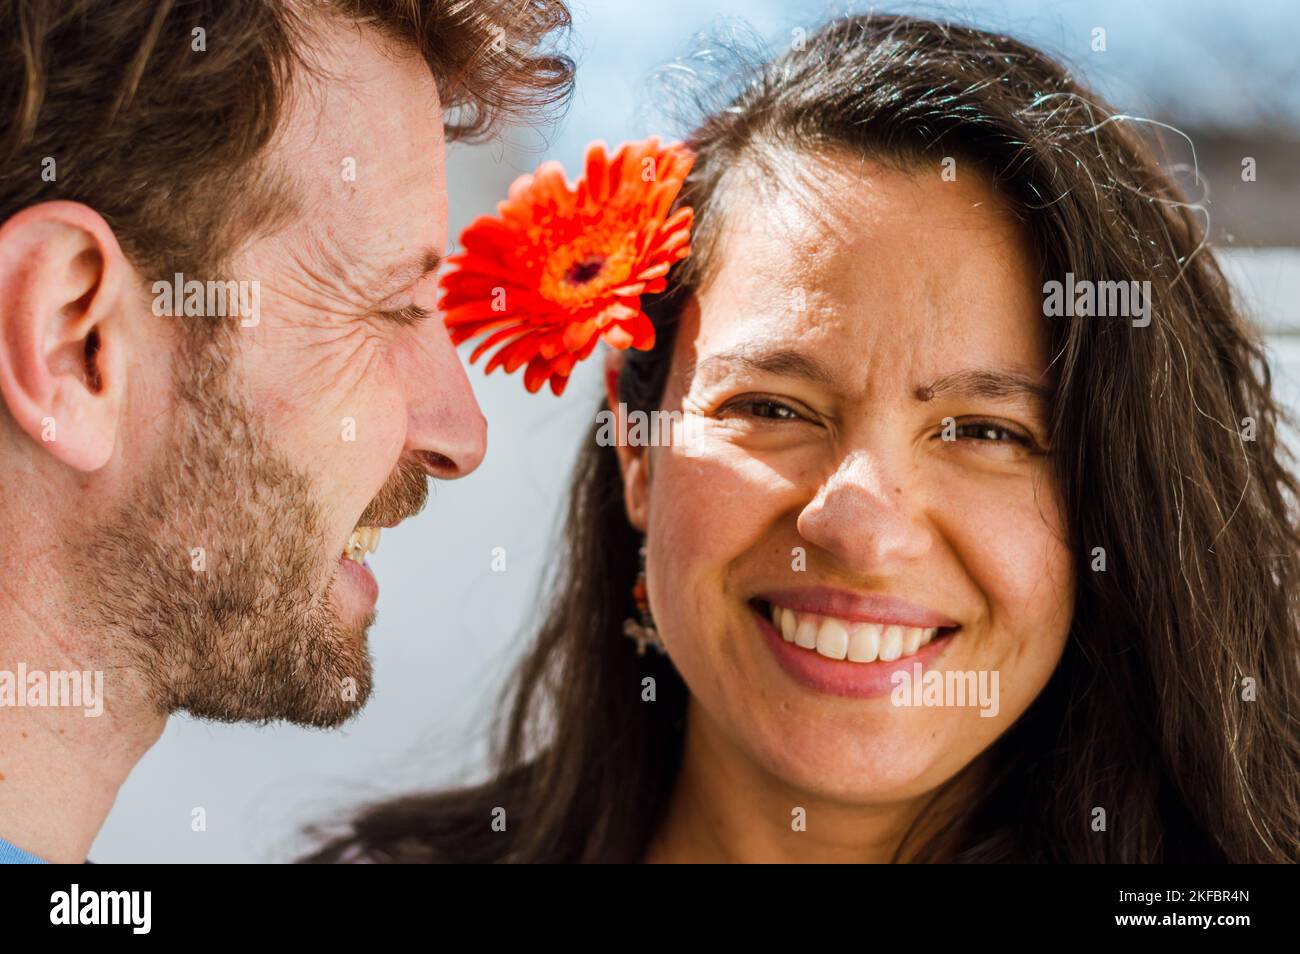 adult latin couple in love at home smiling enjoying the day and playing with flowers, focus on the man who is in profile watching his wife. Stock Photo